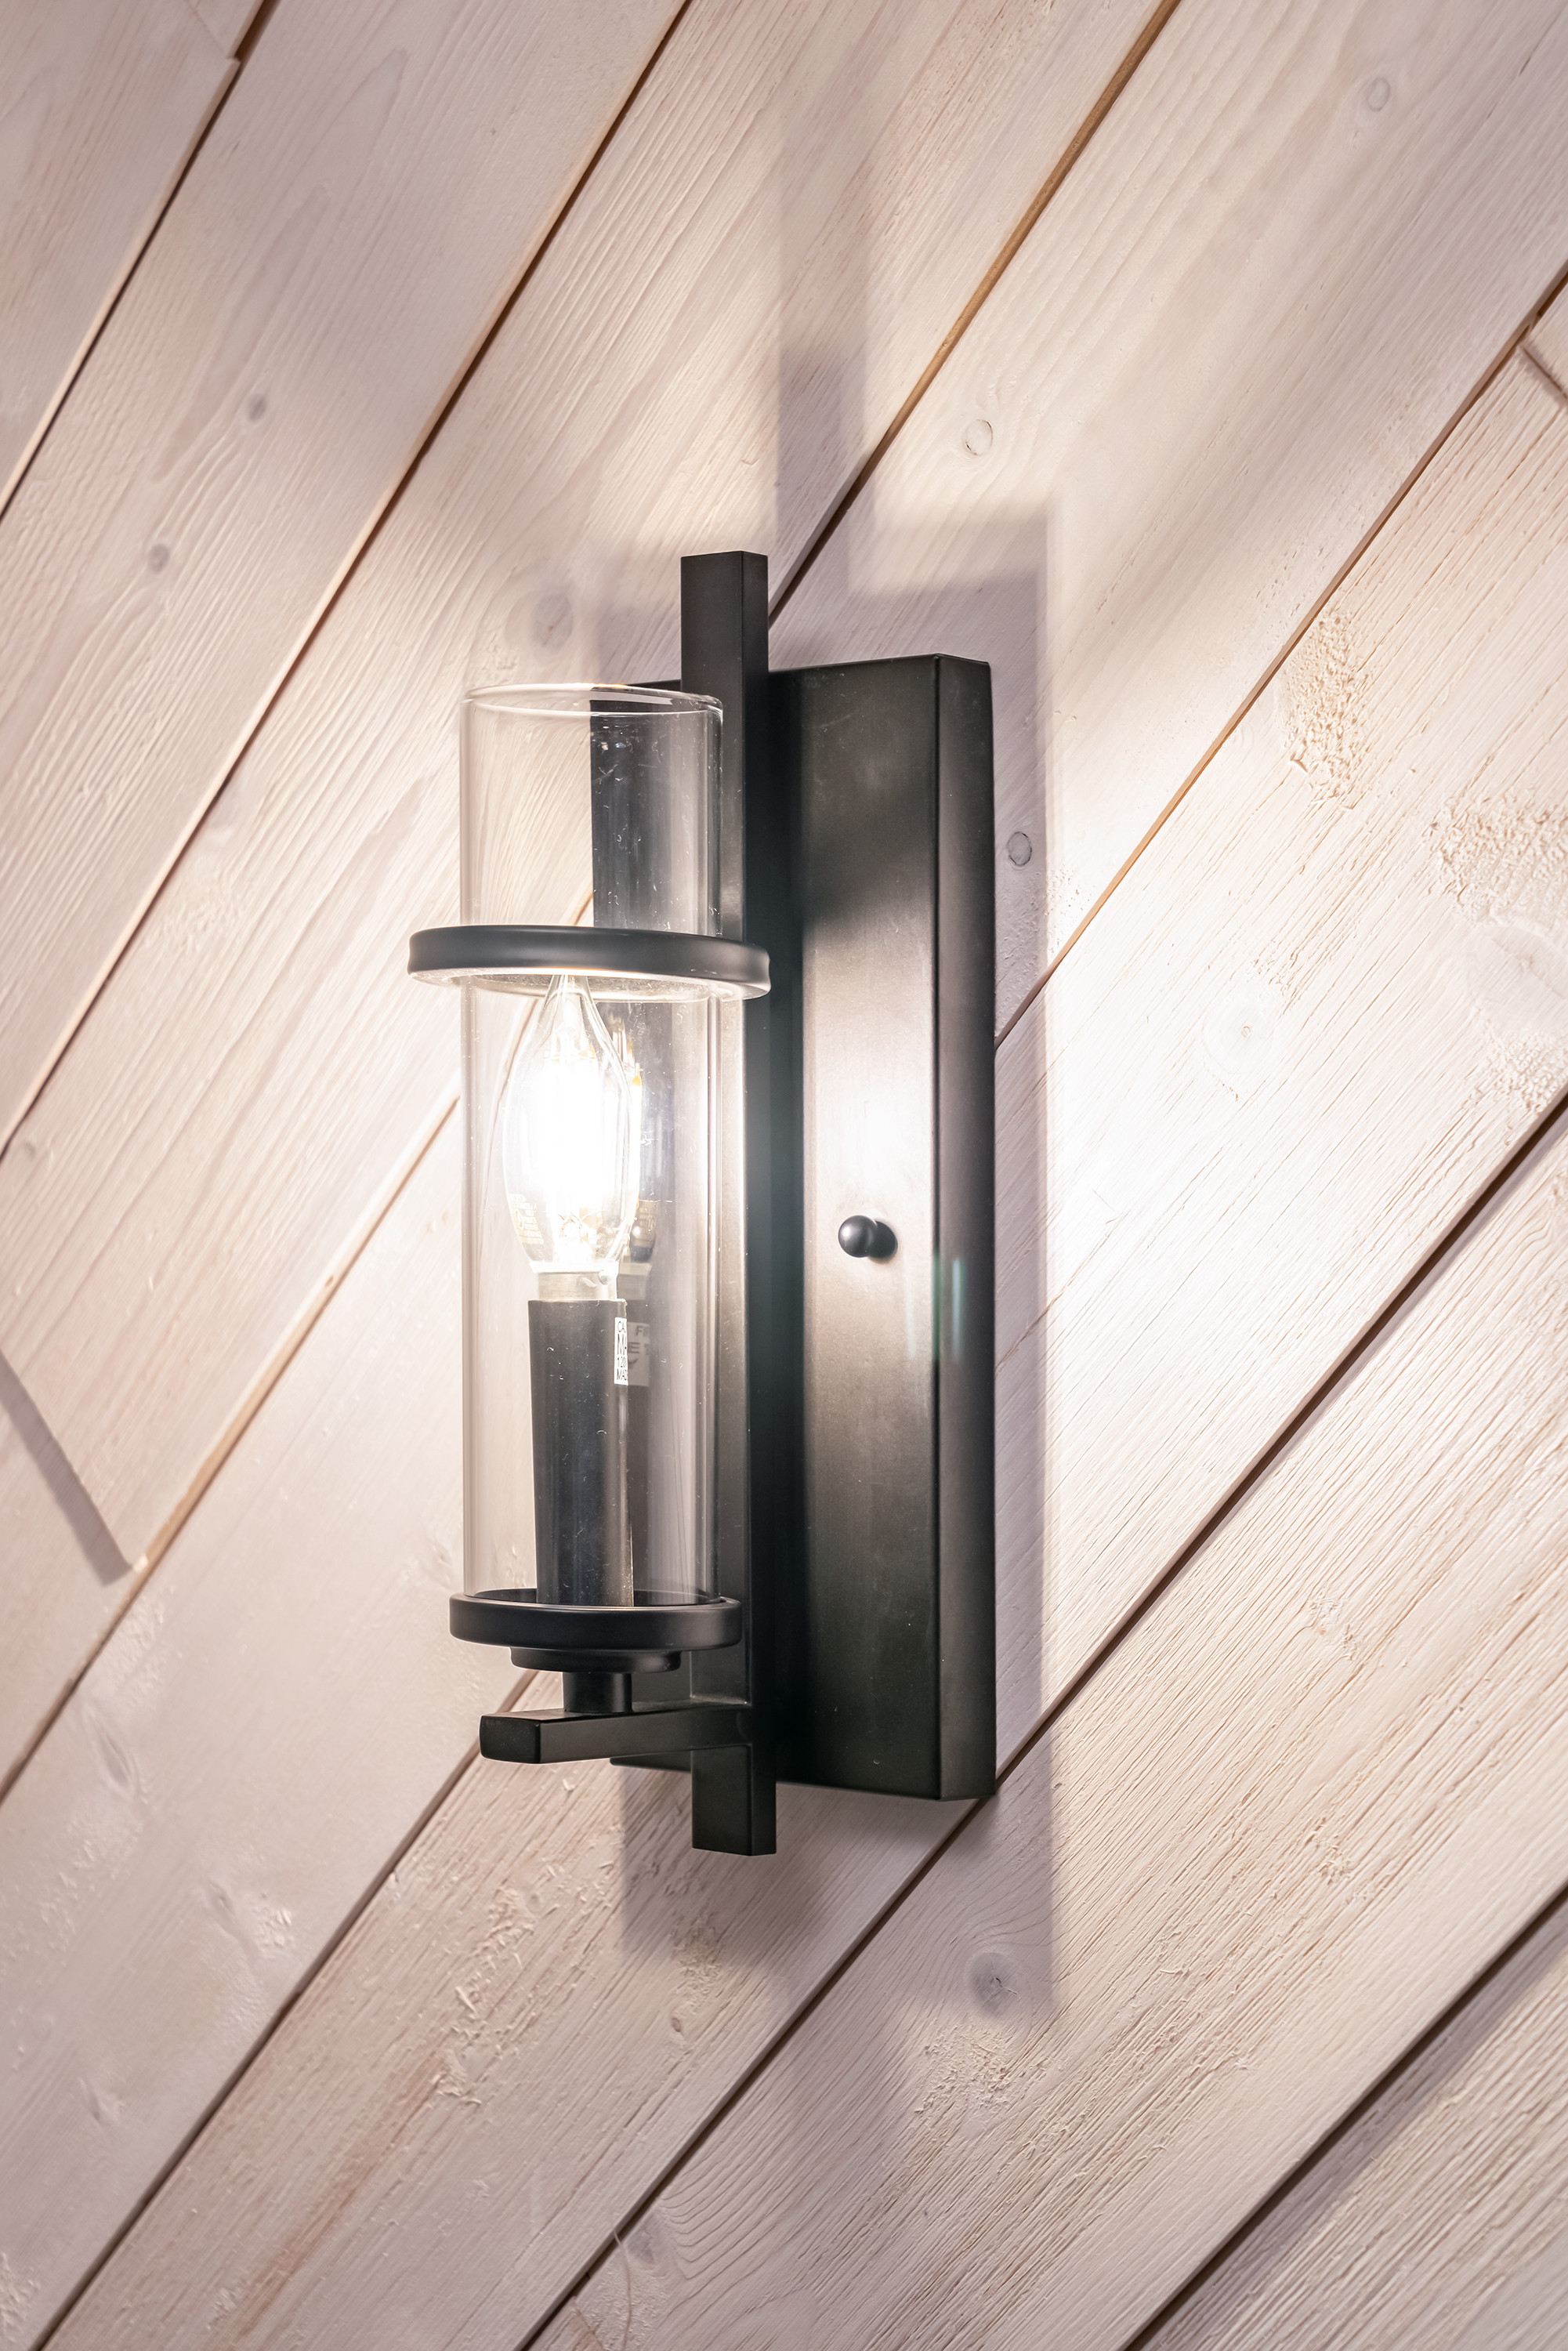 View is of a wall sconce on a diagonal ship lap wall. The light is a candle like bulb with a glass cylinder over it with black bracing attached to a black rectangle.